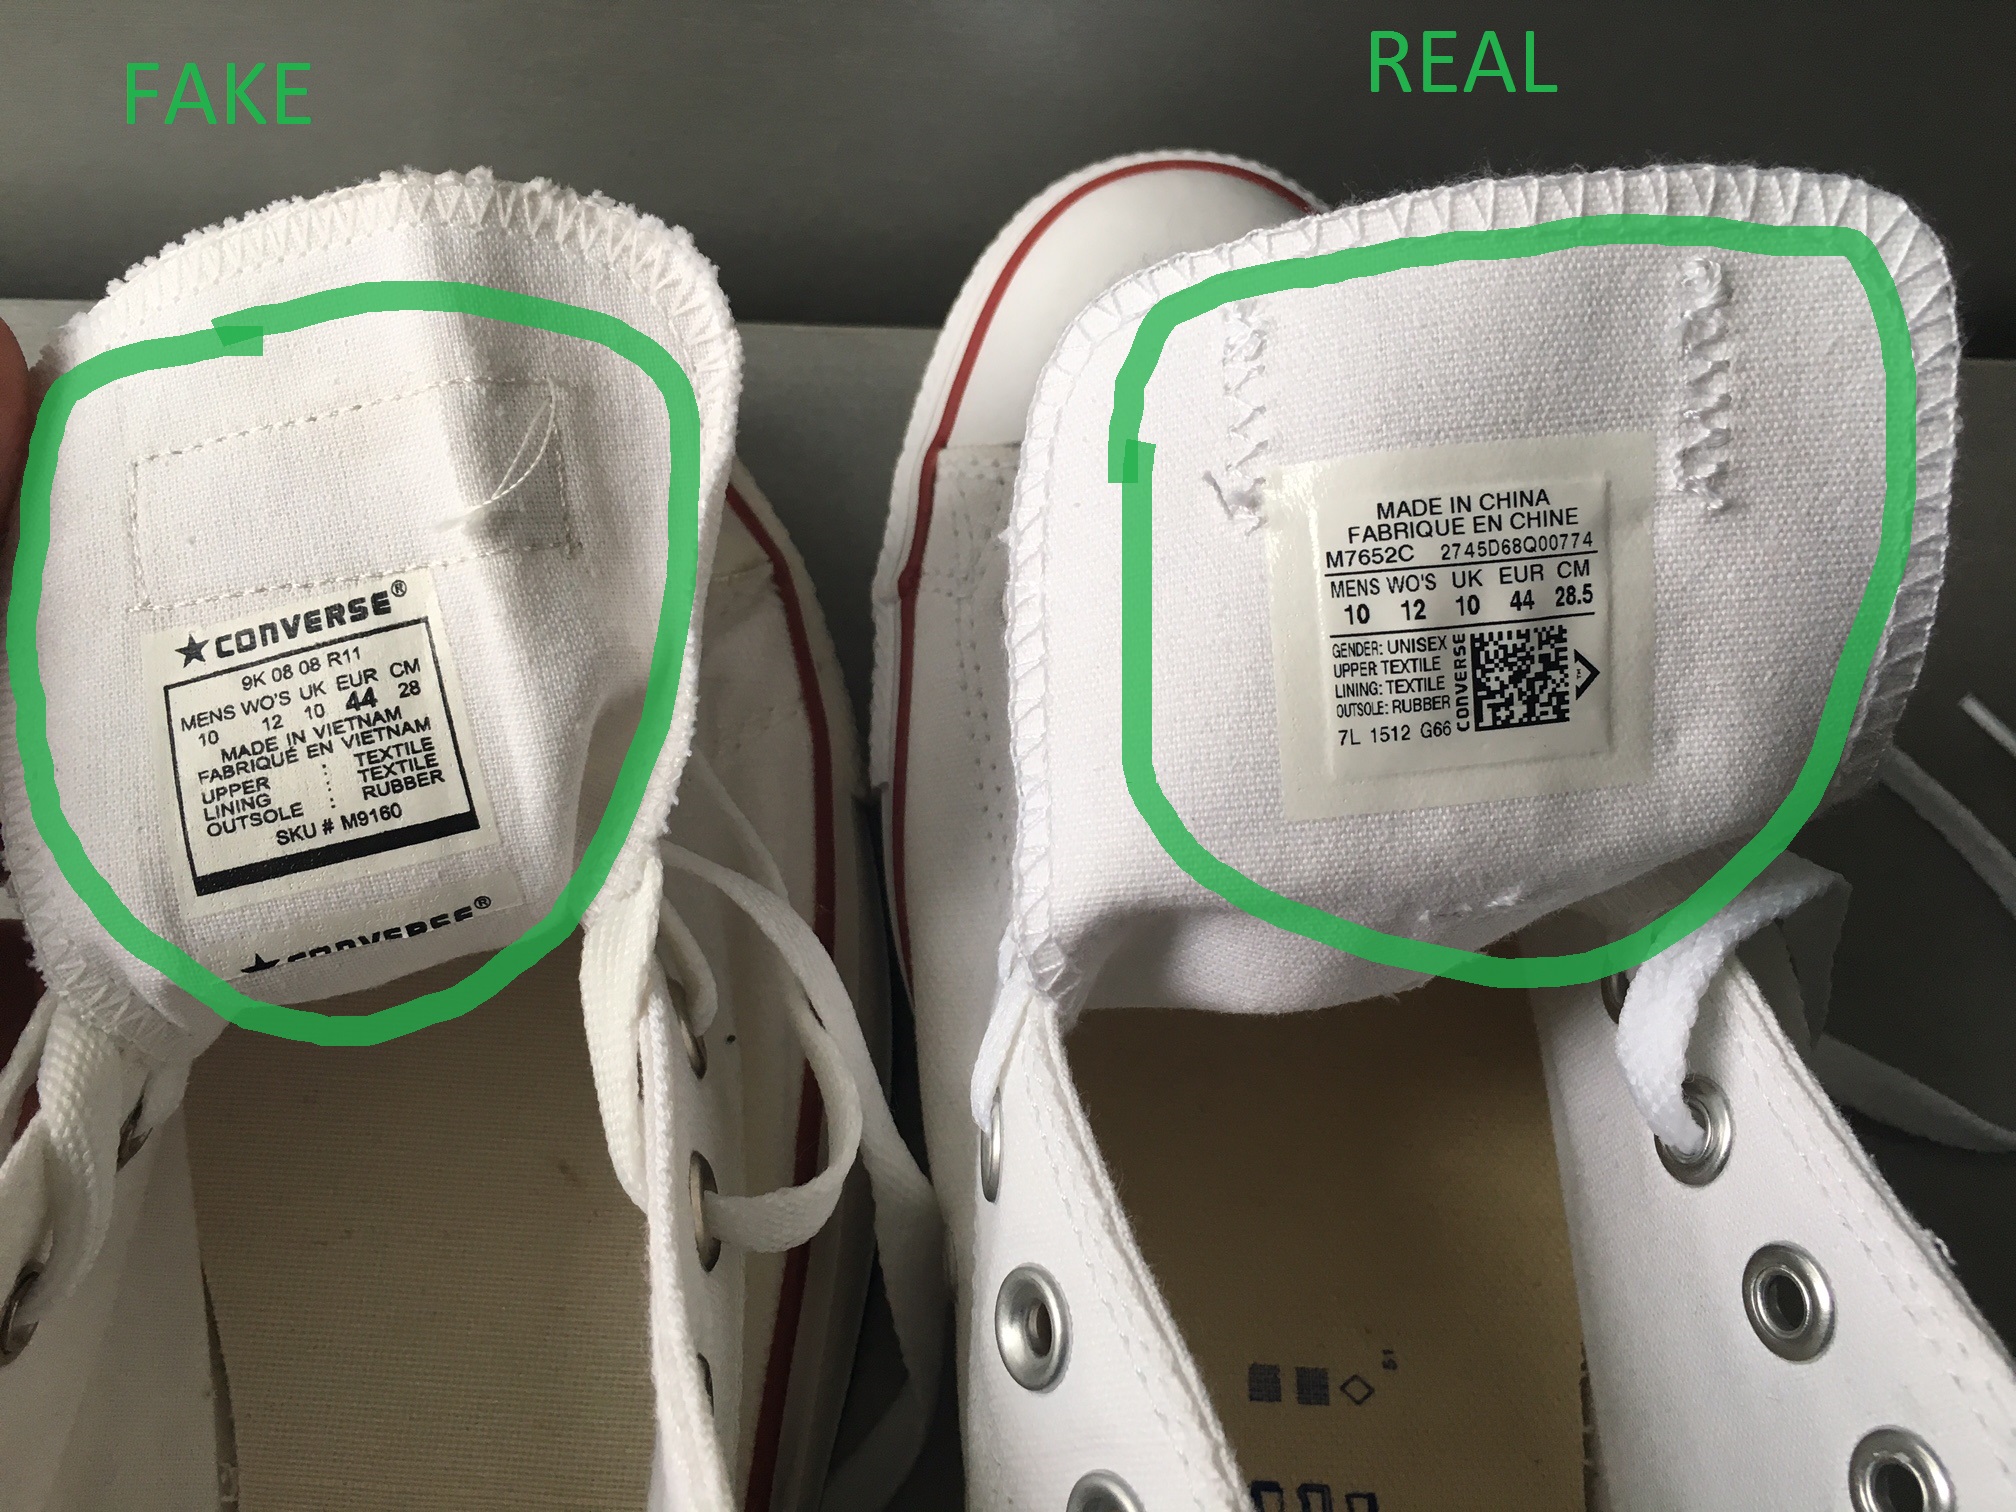 converse made in china or vietnam